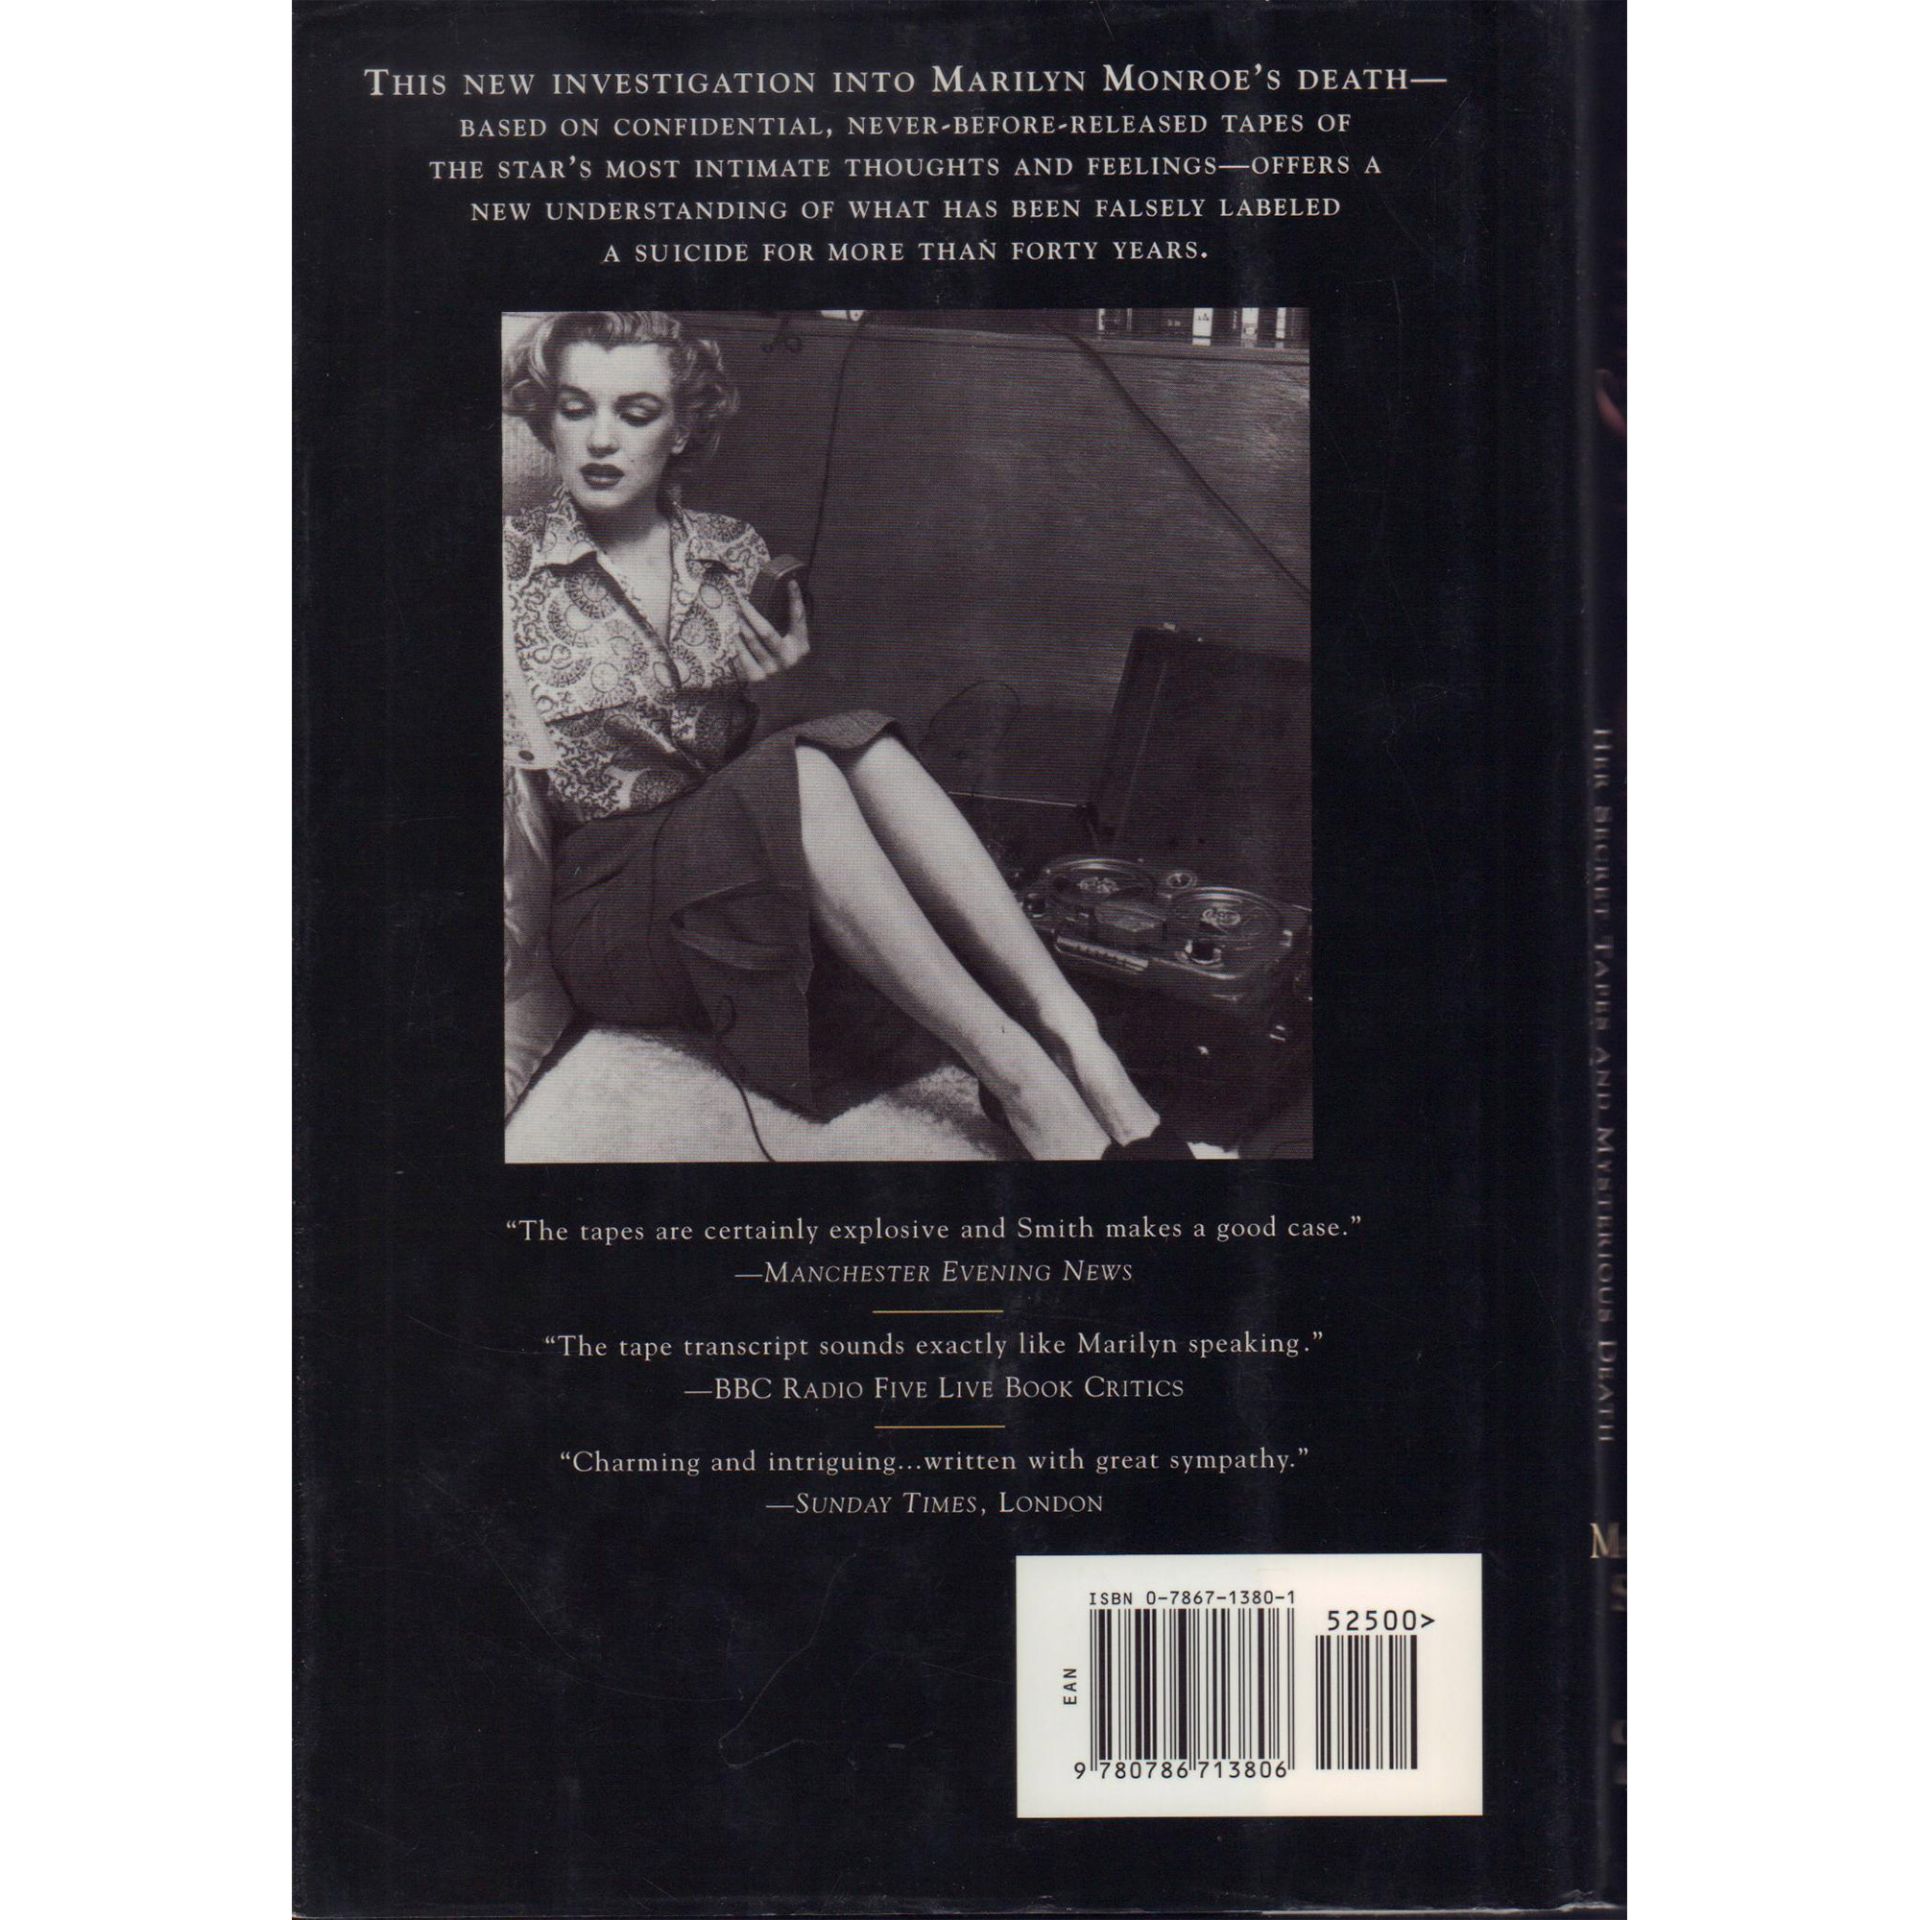 Hardcover Book, Marilyn's Last Words - Image 2 of 2